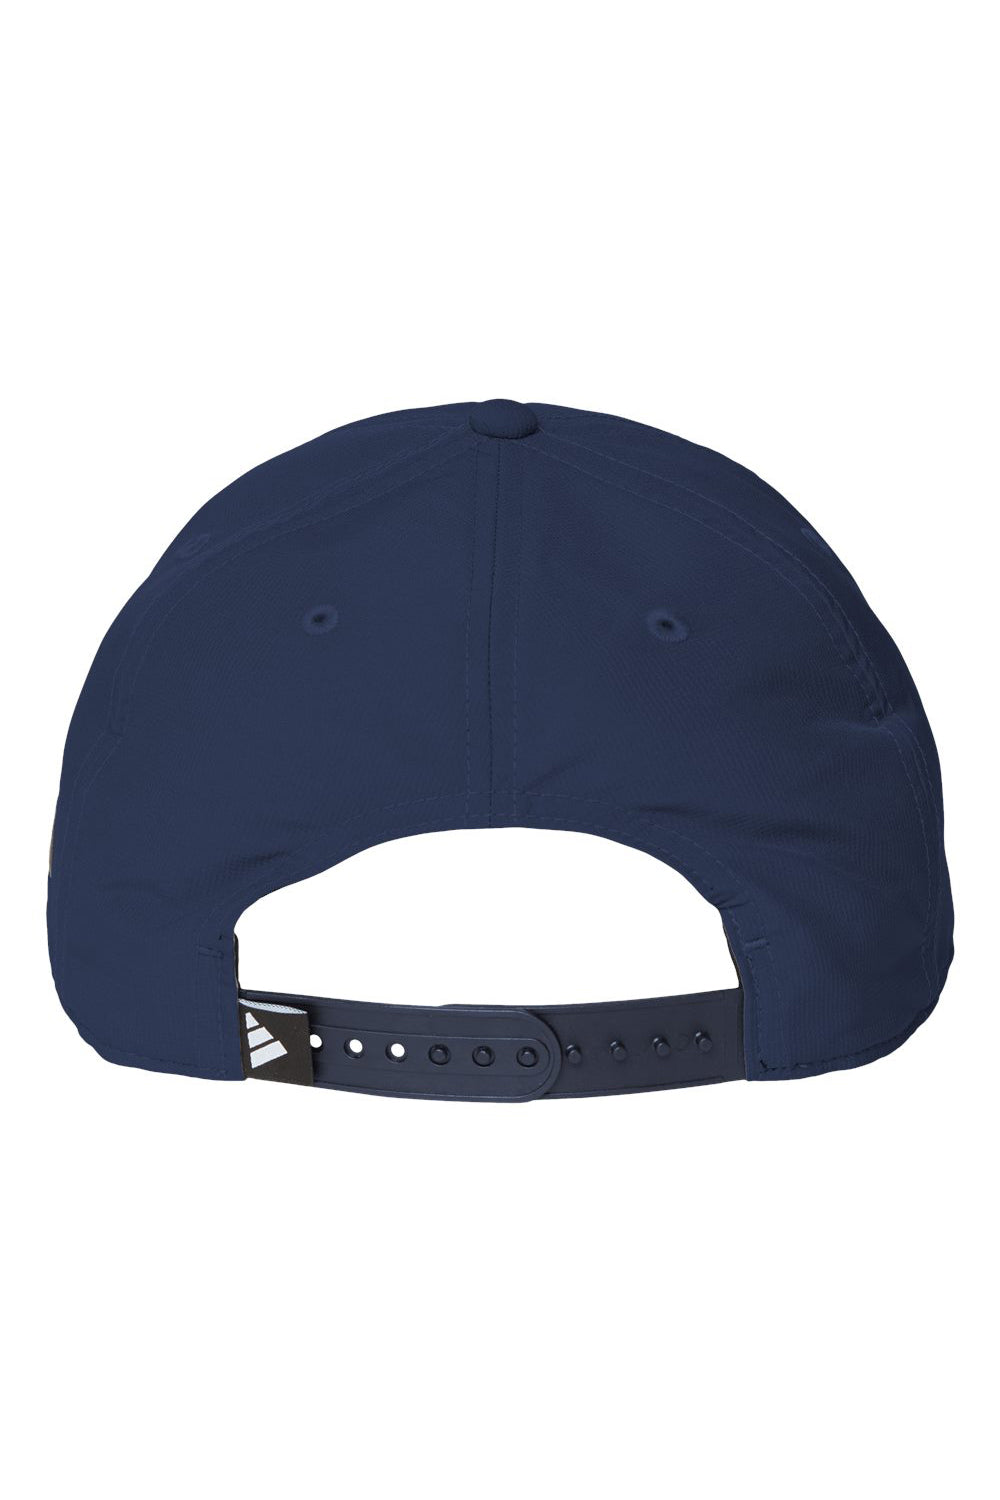 Adidas A605S Mens Sustainable Performance Moisture Wicking Snapback Hat Collegiate Navy Blue Flat Back